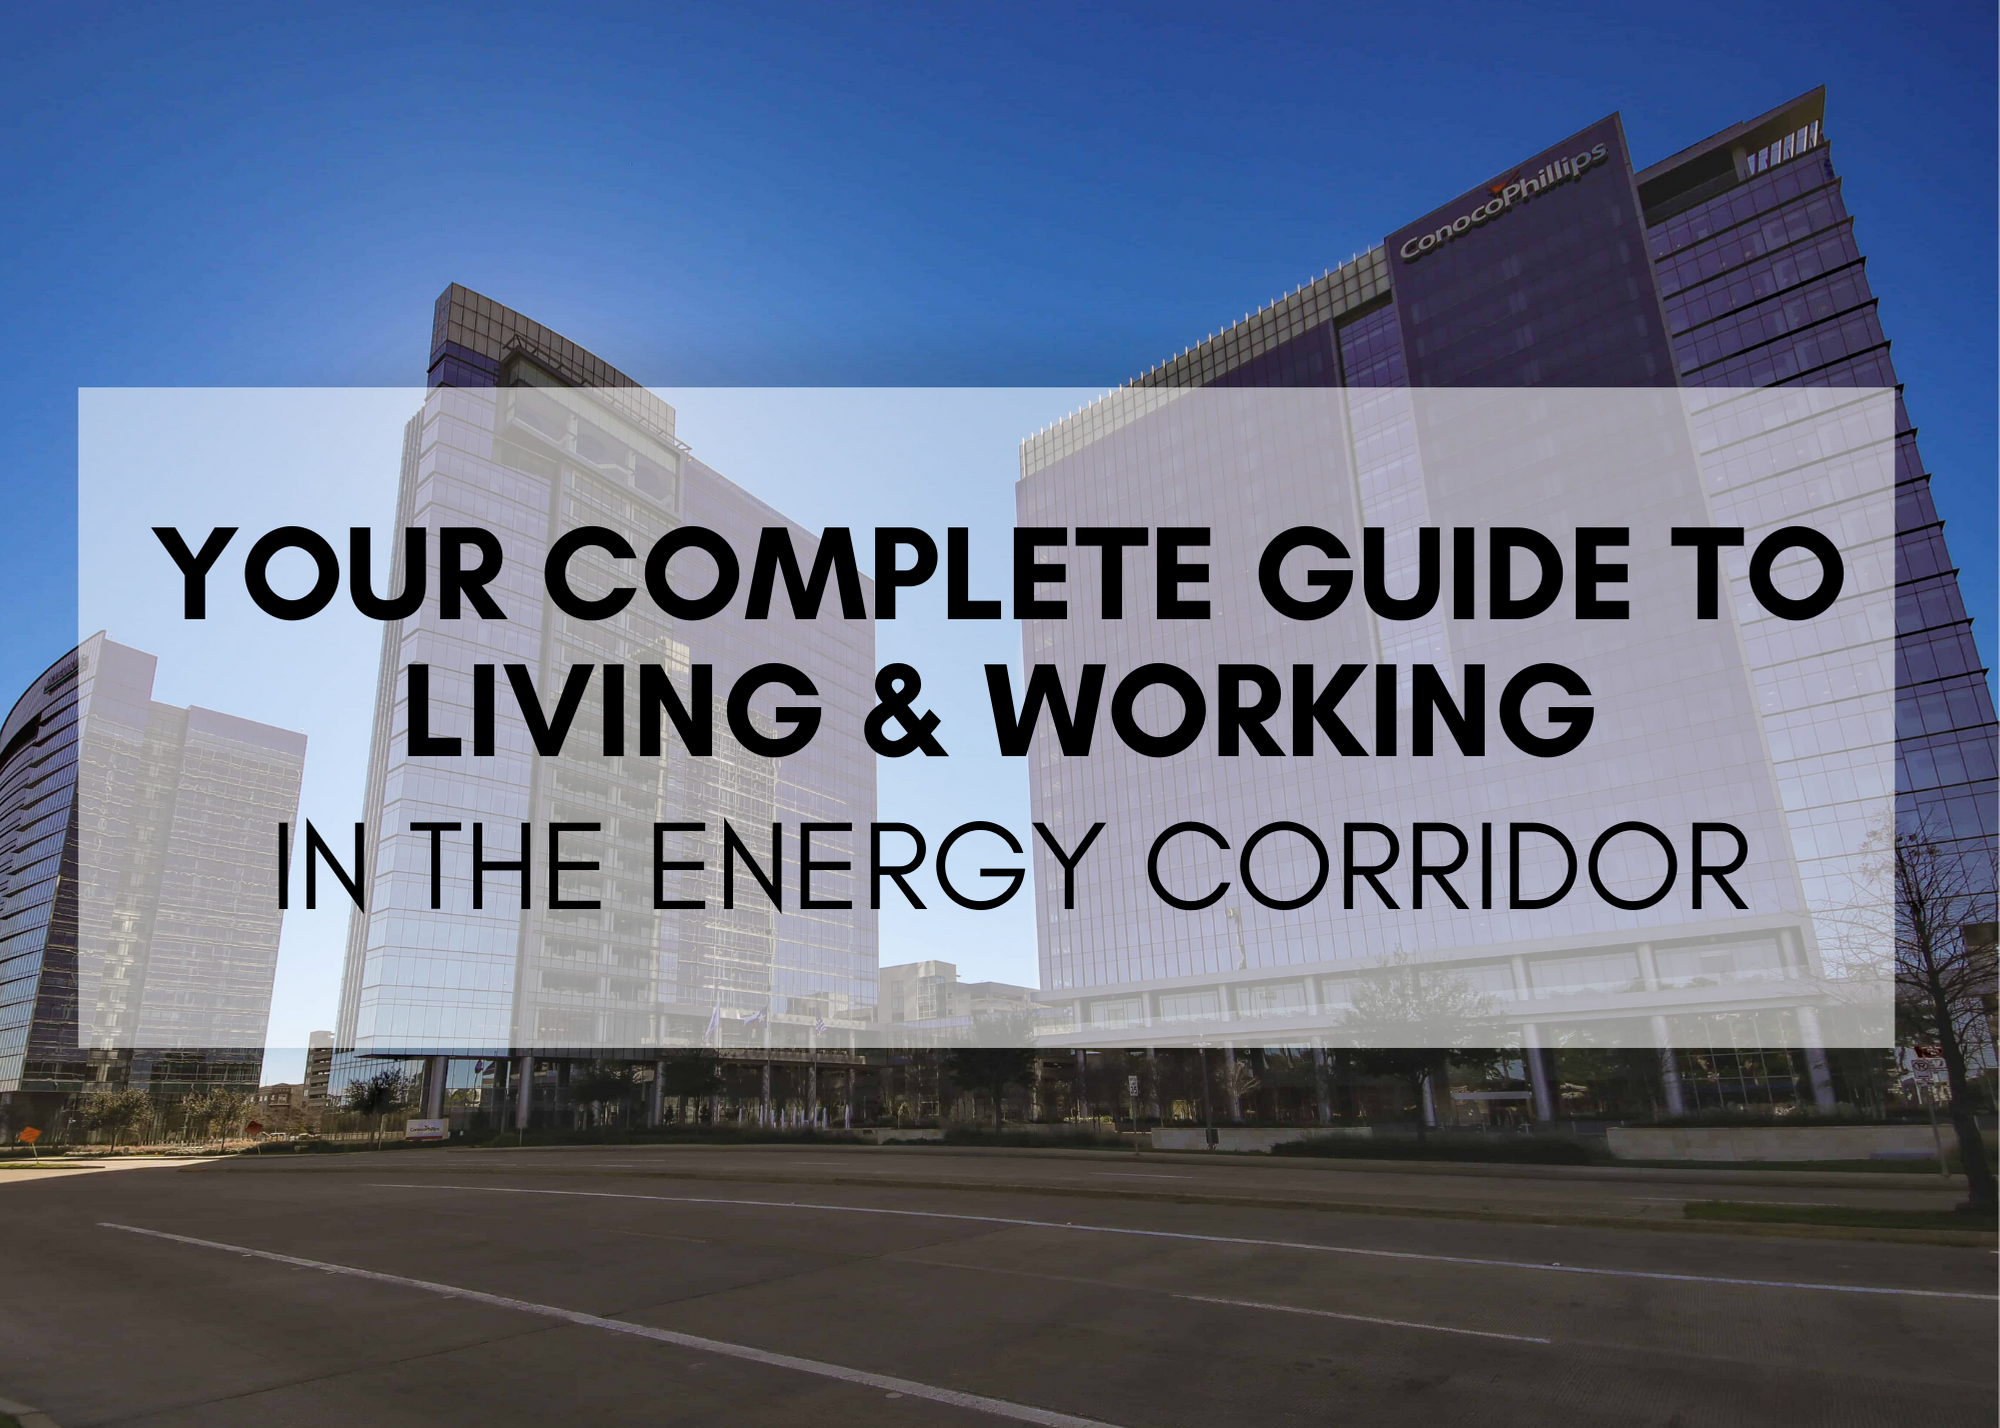 Your Complete Guide to Living & Working in the Energy Corridor